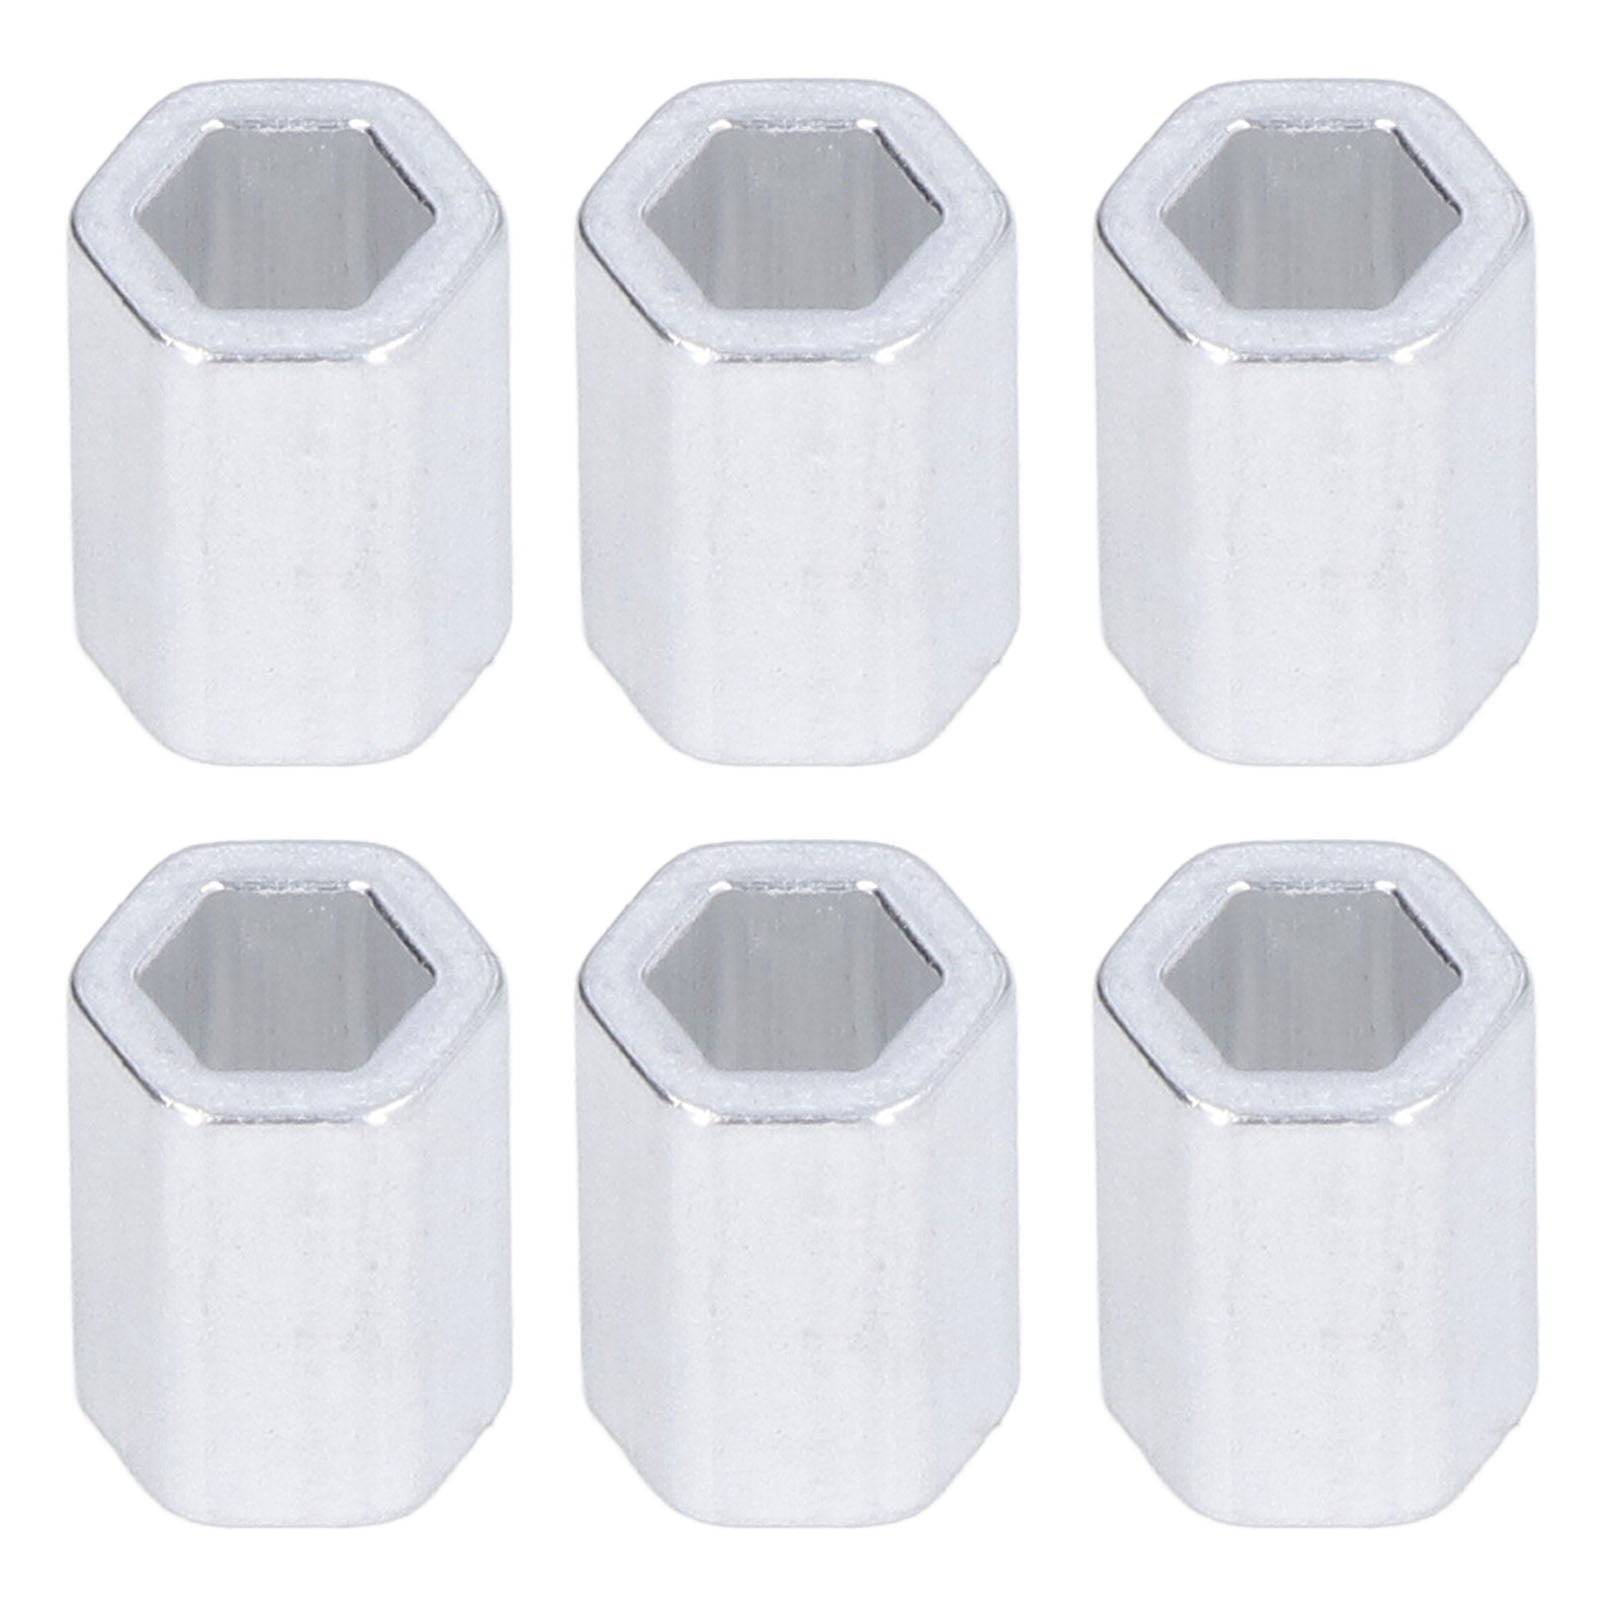 #8 Spacer .25 Inch OD Clear Hole 12 Pack 1 Inch Hex Alum 